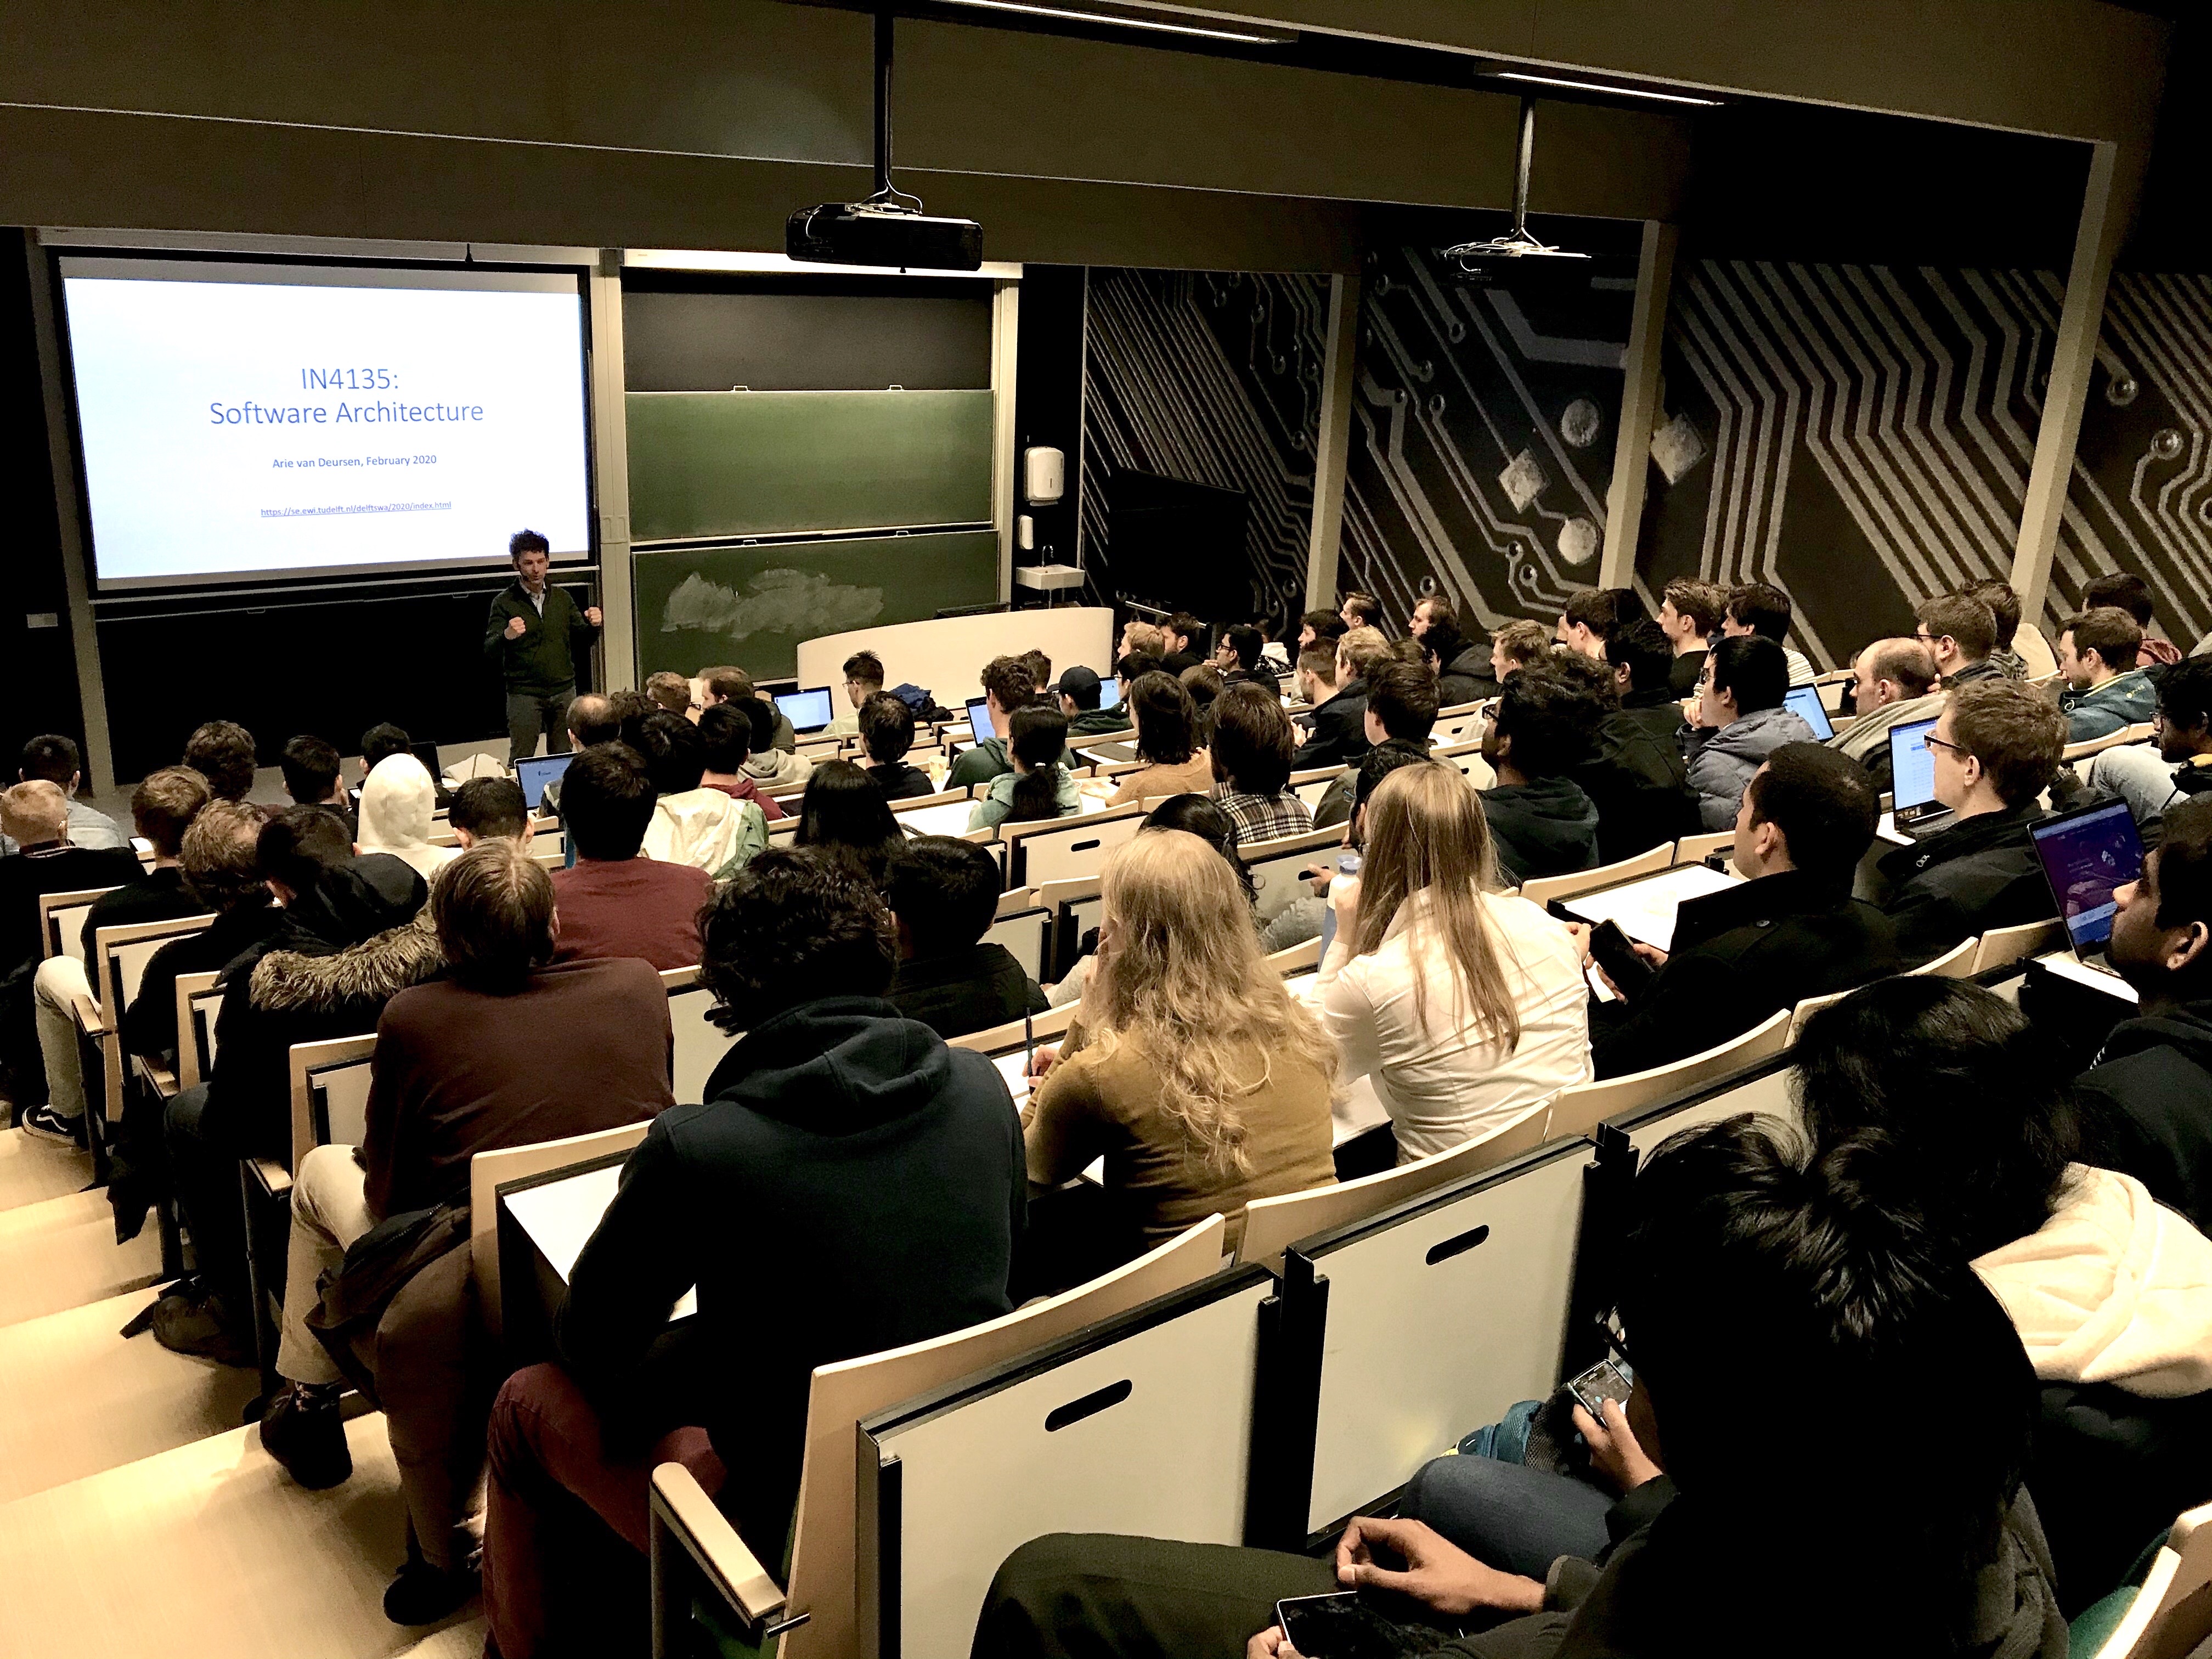 Pre-Corona: First lecture with 120 students in a room fitting 140, February 2020